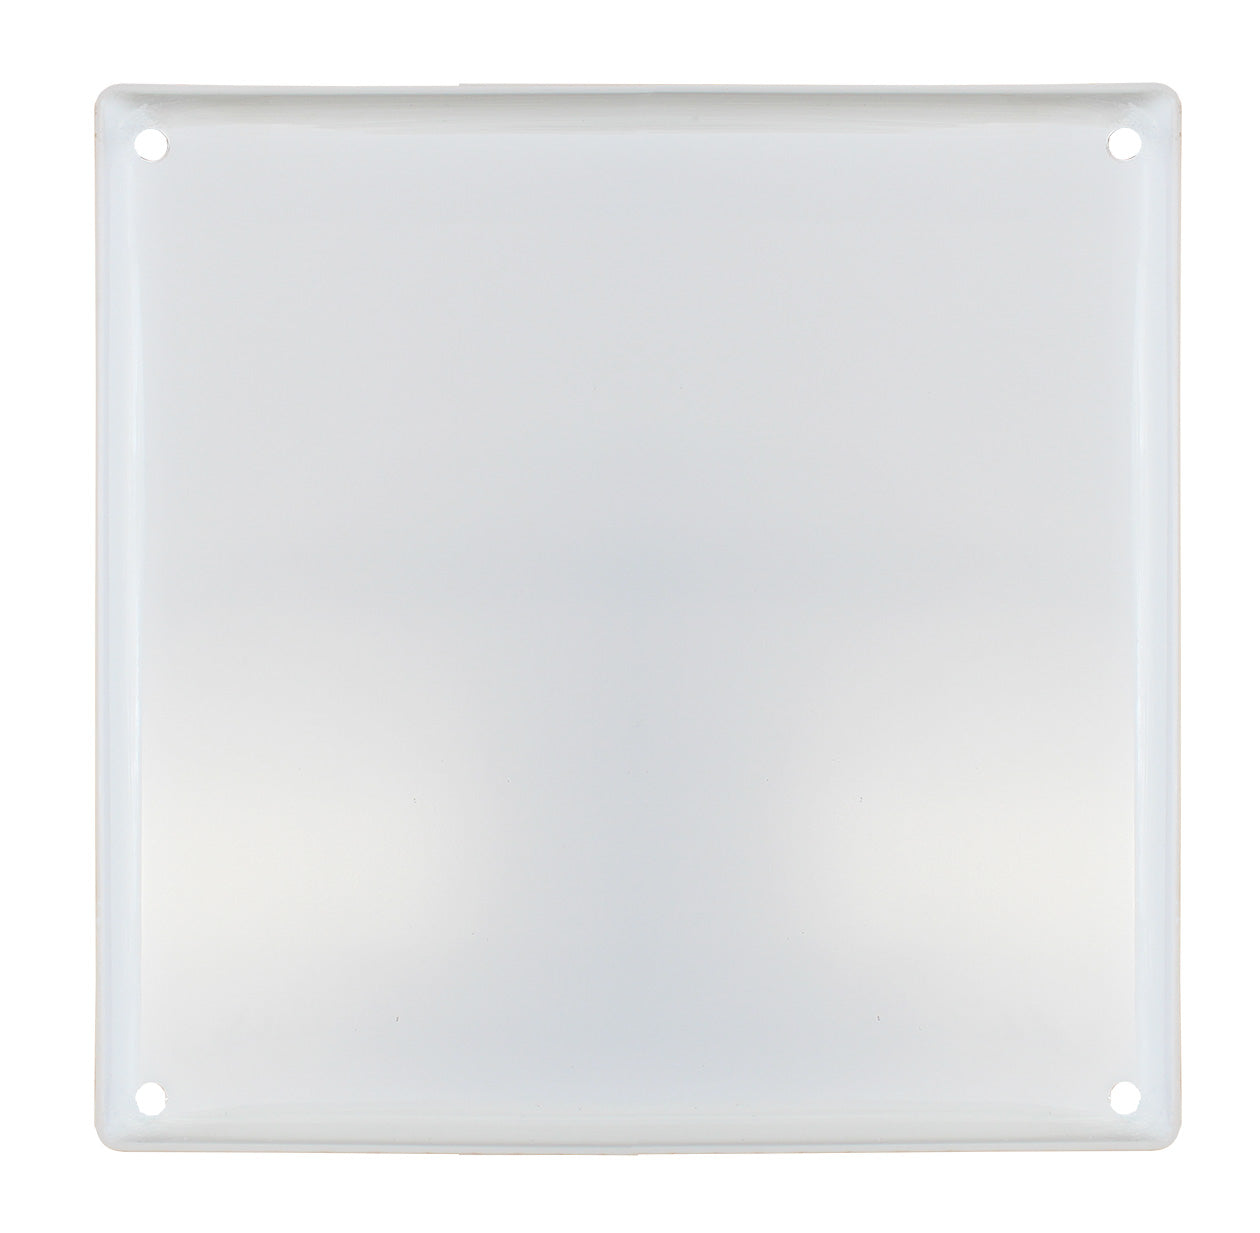 HEKA Contact Warm Plate for Chicks, 20cm x 20cm - optional with Dimmer